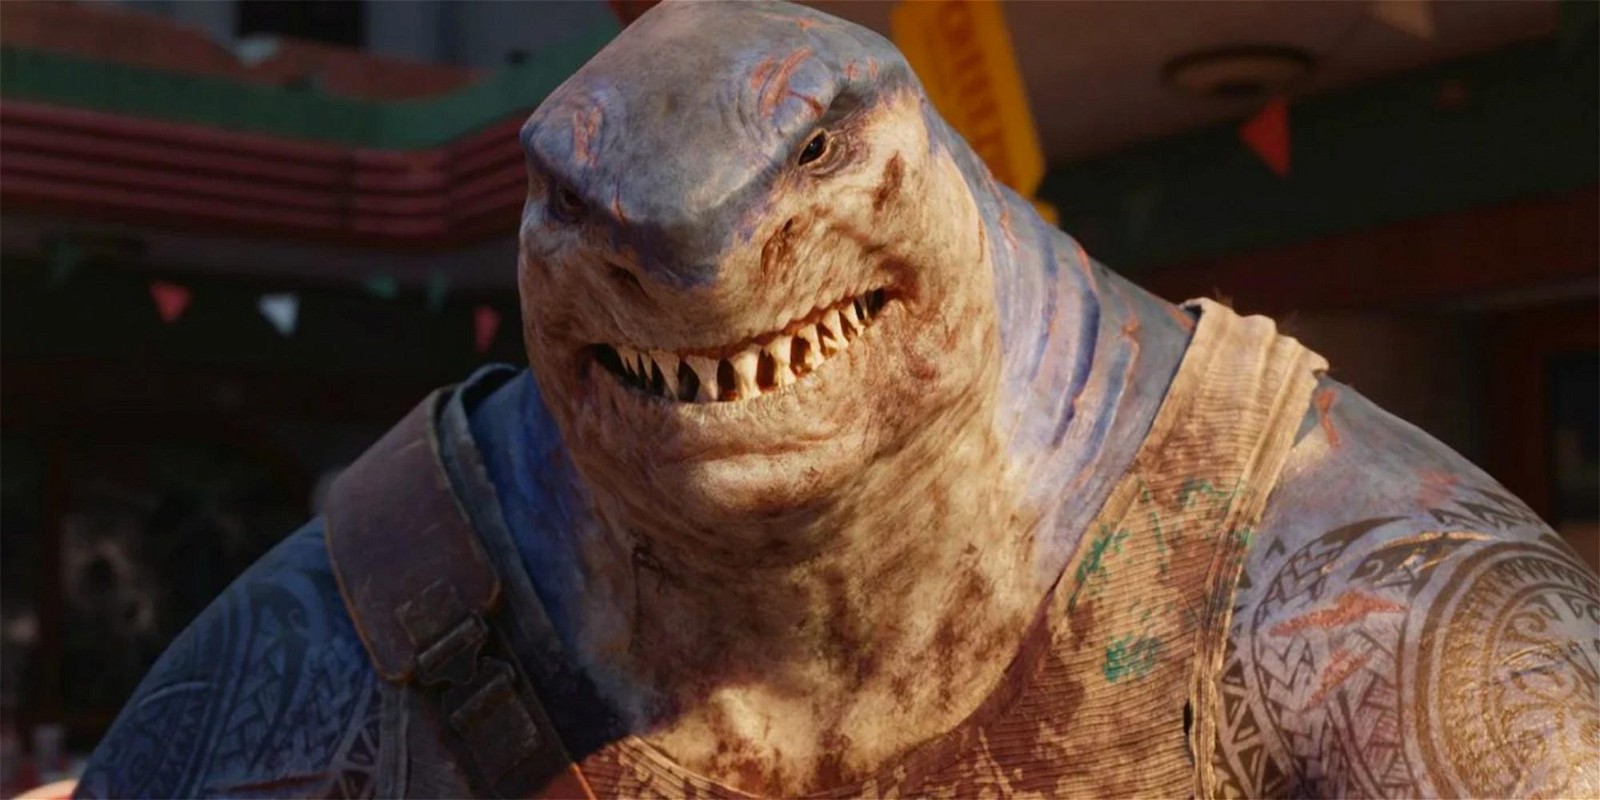 King Shark in The Suicide Squad